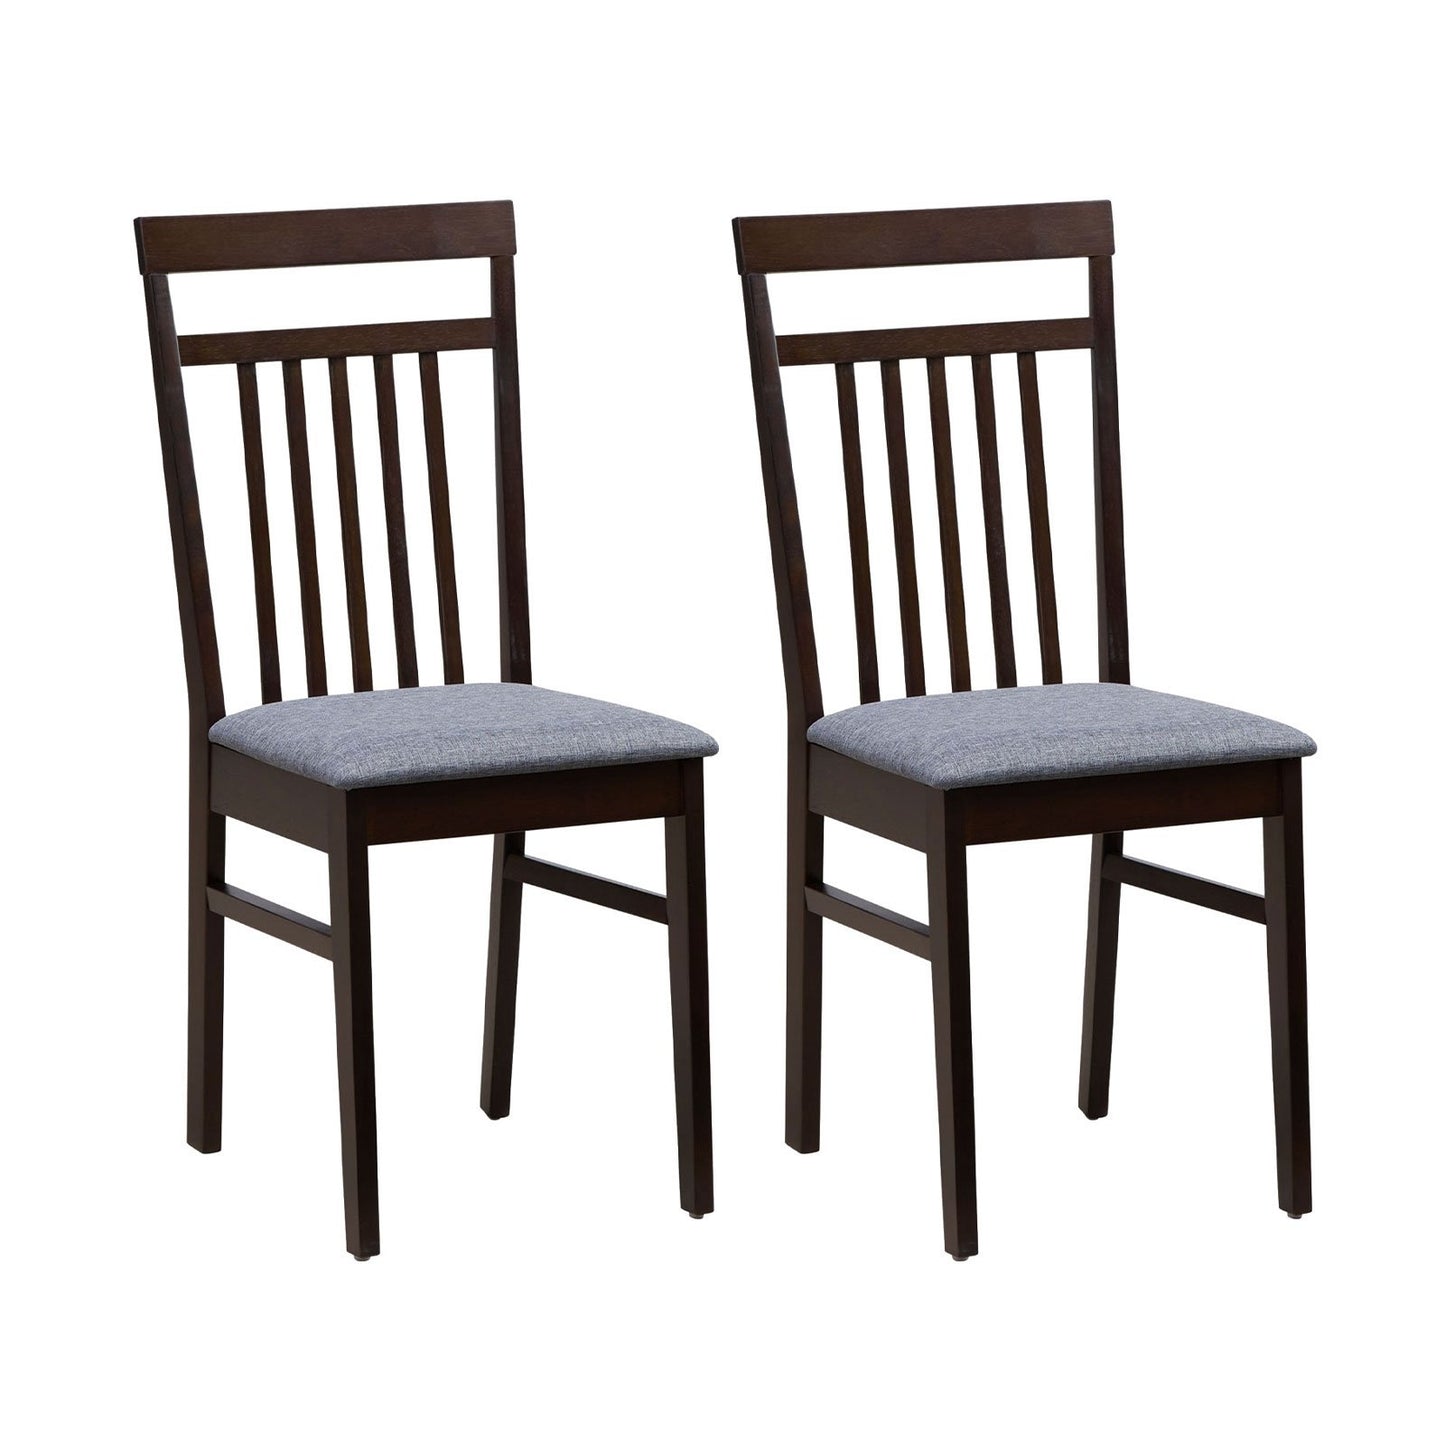 Upholstered Dining Chair Set of 2, Brown